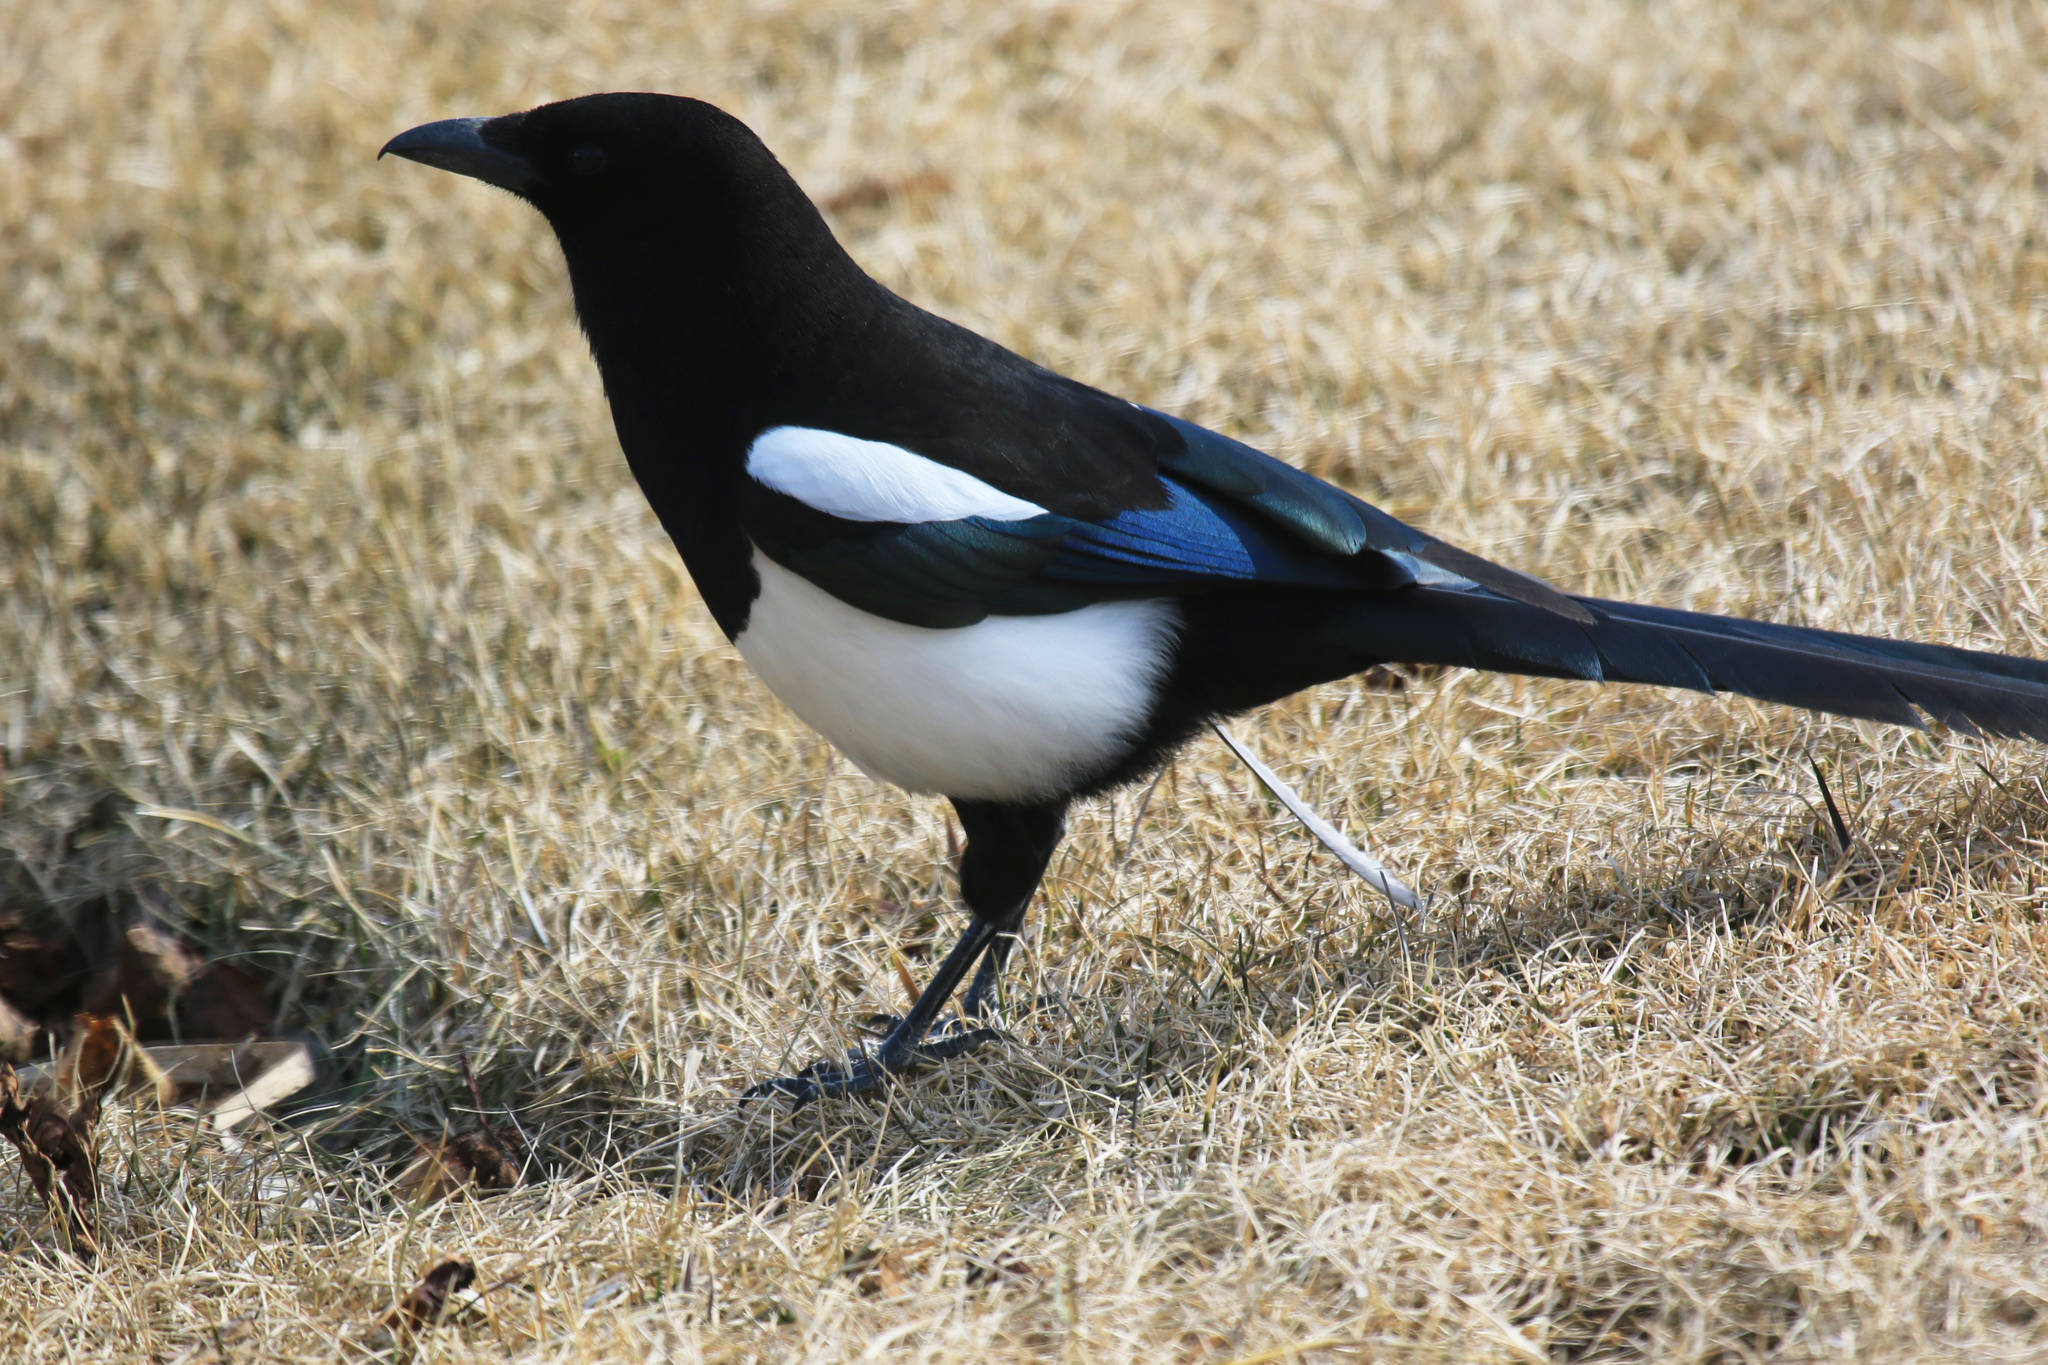 Black billed magpie. (Photo by Carla Stanley)